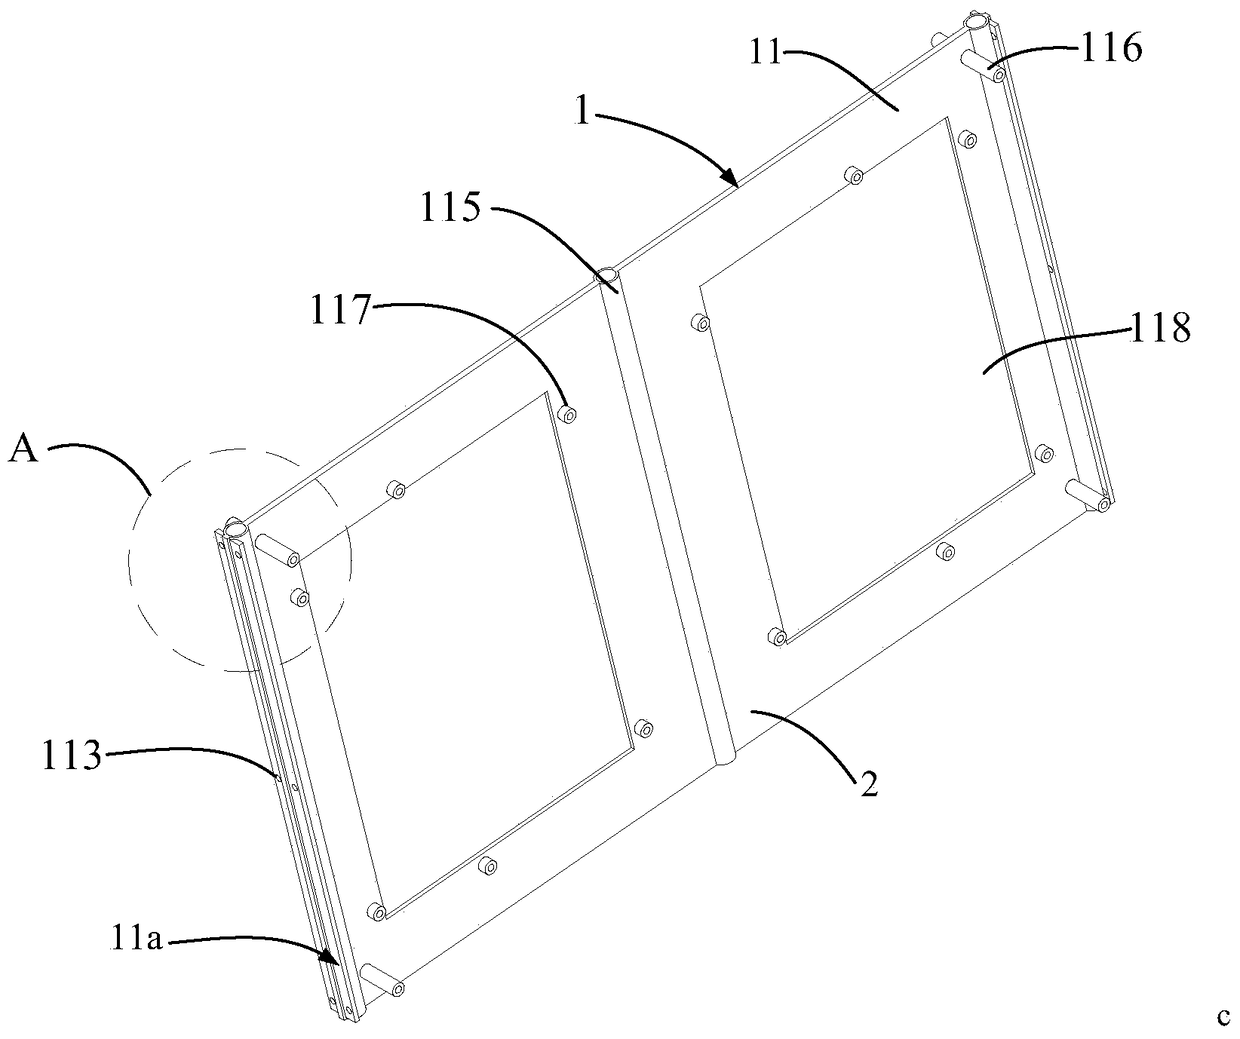 The middle frame of the display, the casing of the display and the display